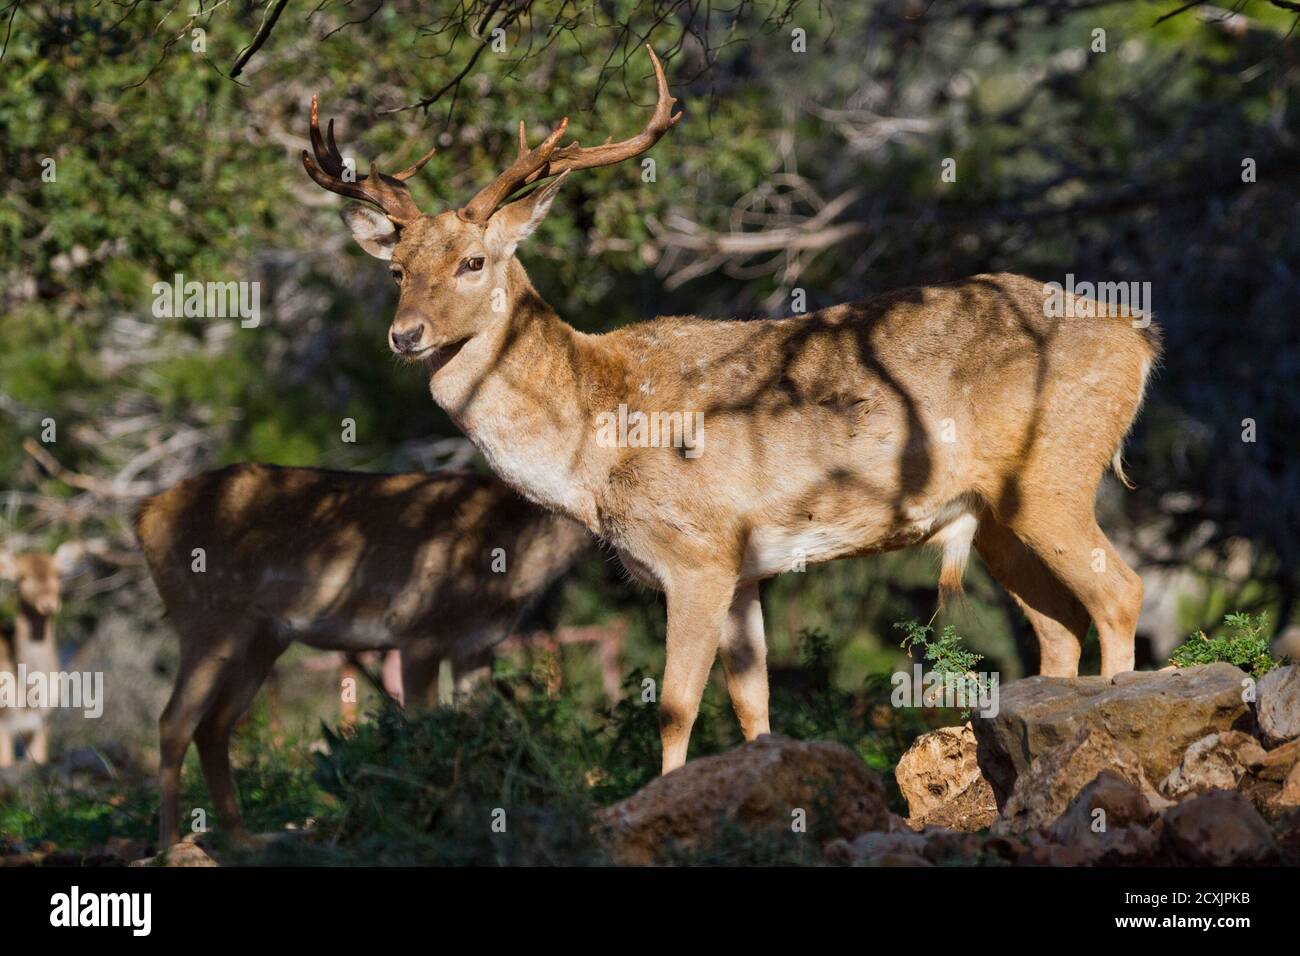 Male Mesopotamian Fallow deer (Dama mesopotamica) Photographed in Israel Carmel forest. This is a breading nucleus in the process of reintroduction to Stock Photo